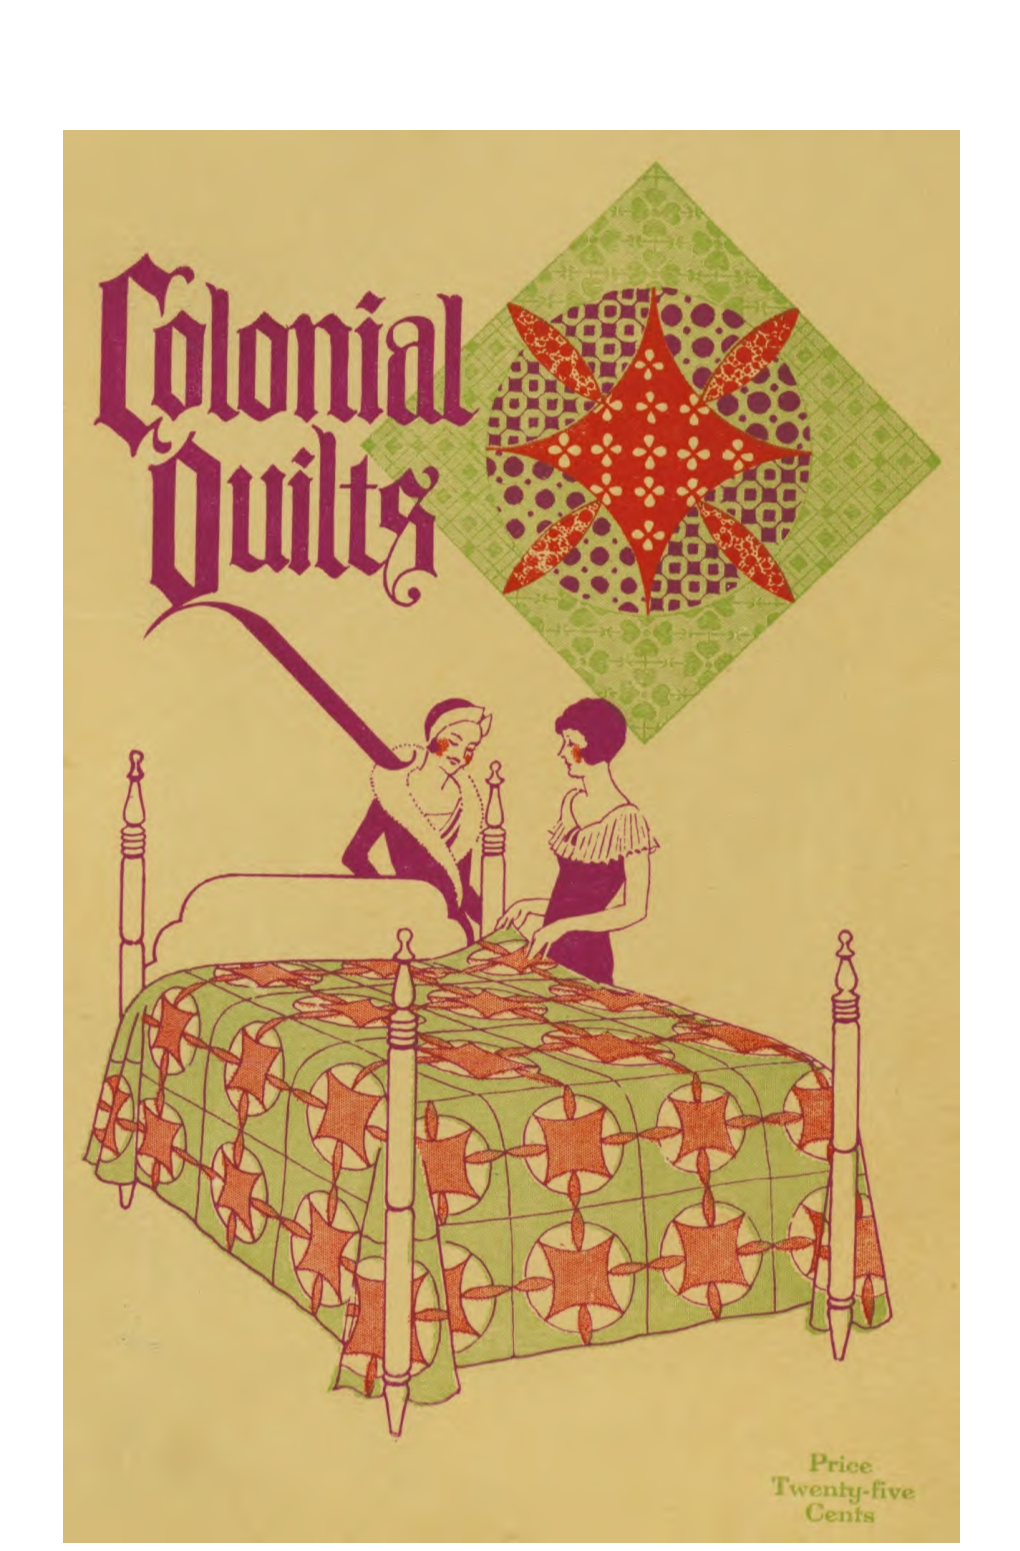 The Quilt Patterns Appearing Daily in the Enquirer Are the Most Beautiful Designs from a Collection Numbering Well Over 100,000